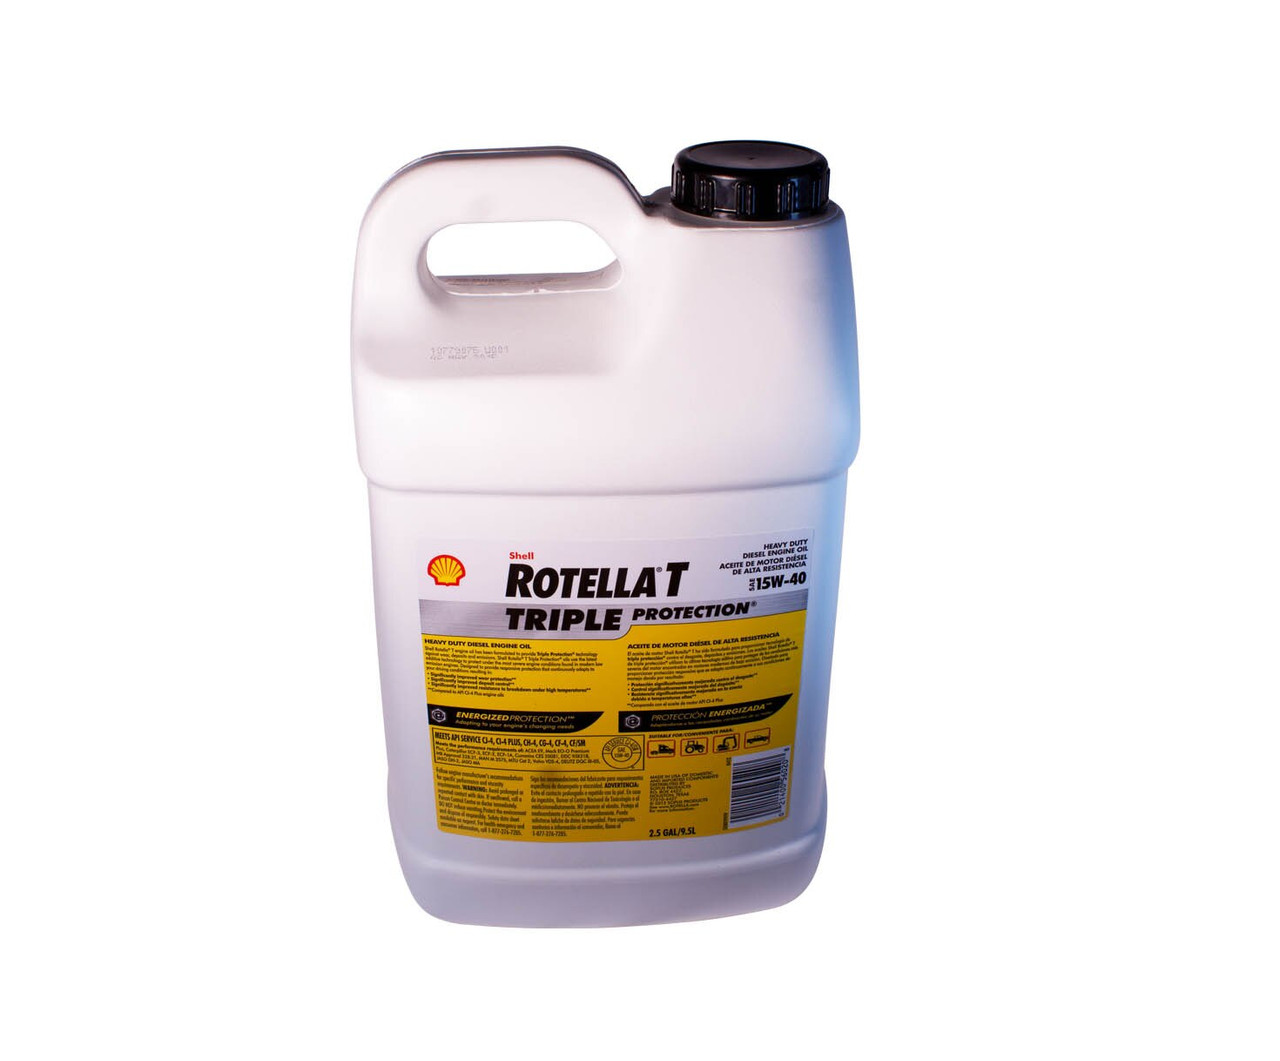 Shell Rotella T4 Triple Protection 15W-40 Diesel Motor Oil, 1 Gallon 